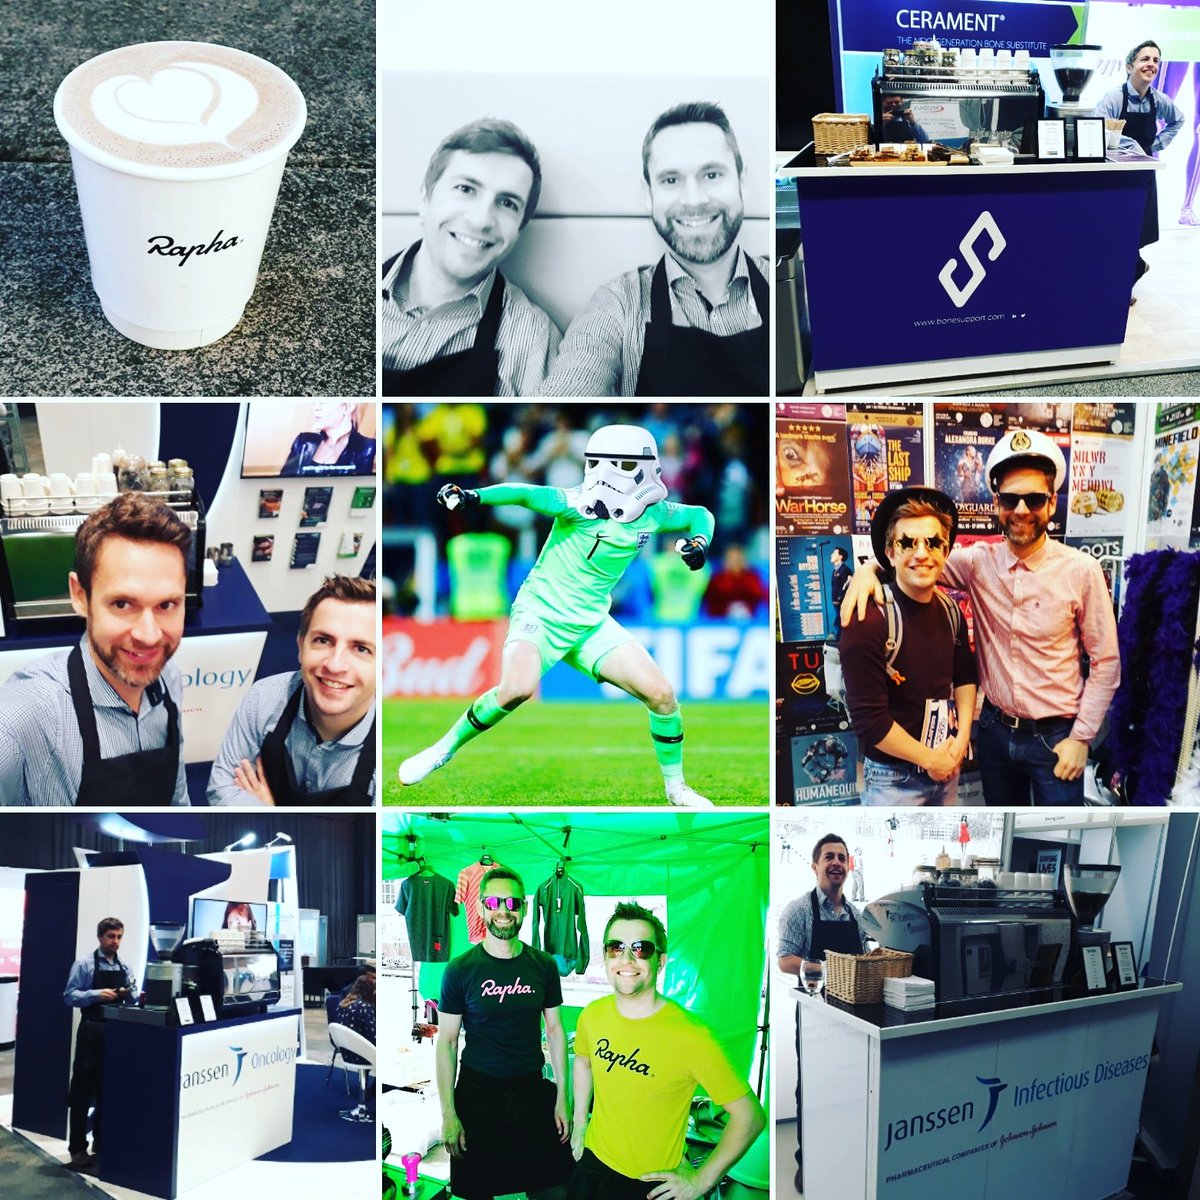 Thanks 2018, it's been fun. Here's to a great 2019 filled with tasty coffee.
#topnine 
#coffeeevents 
#eventcoffee 
#corporateevents 
#exhibitioncoffee